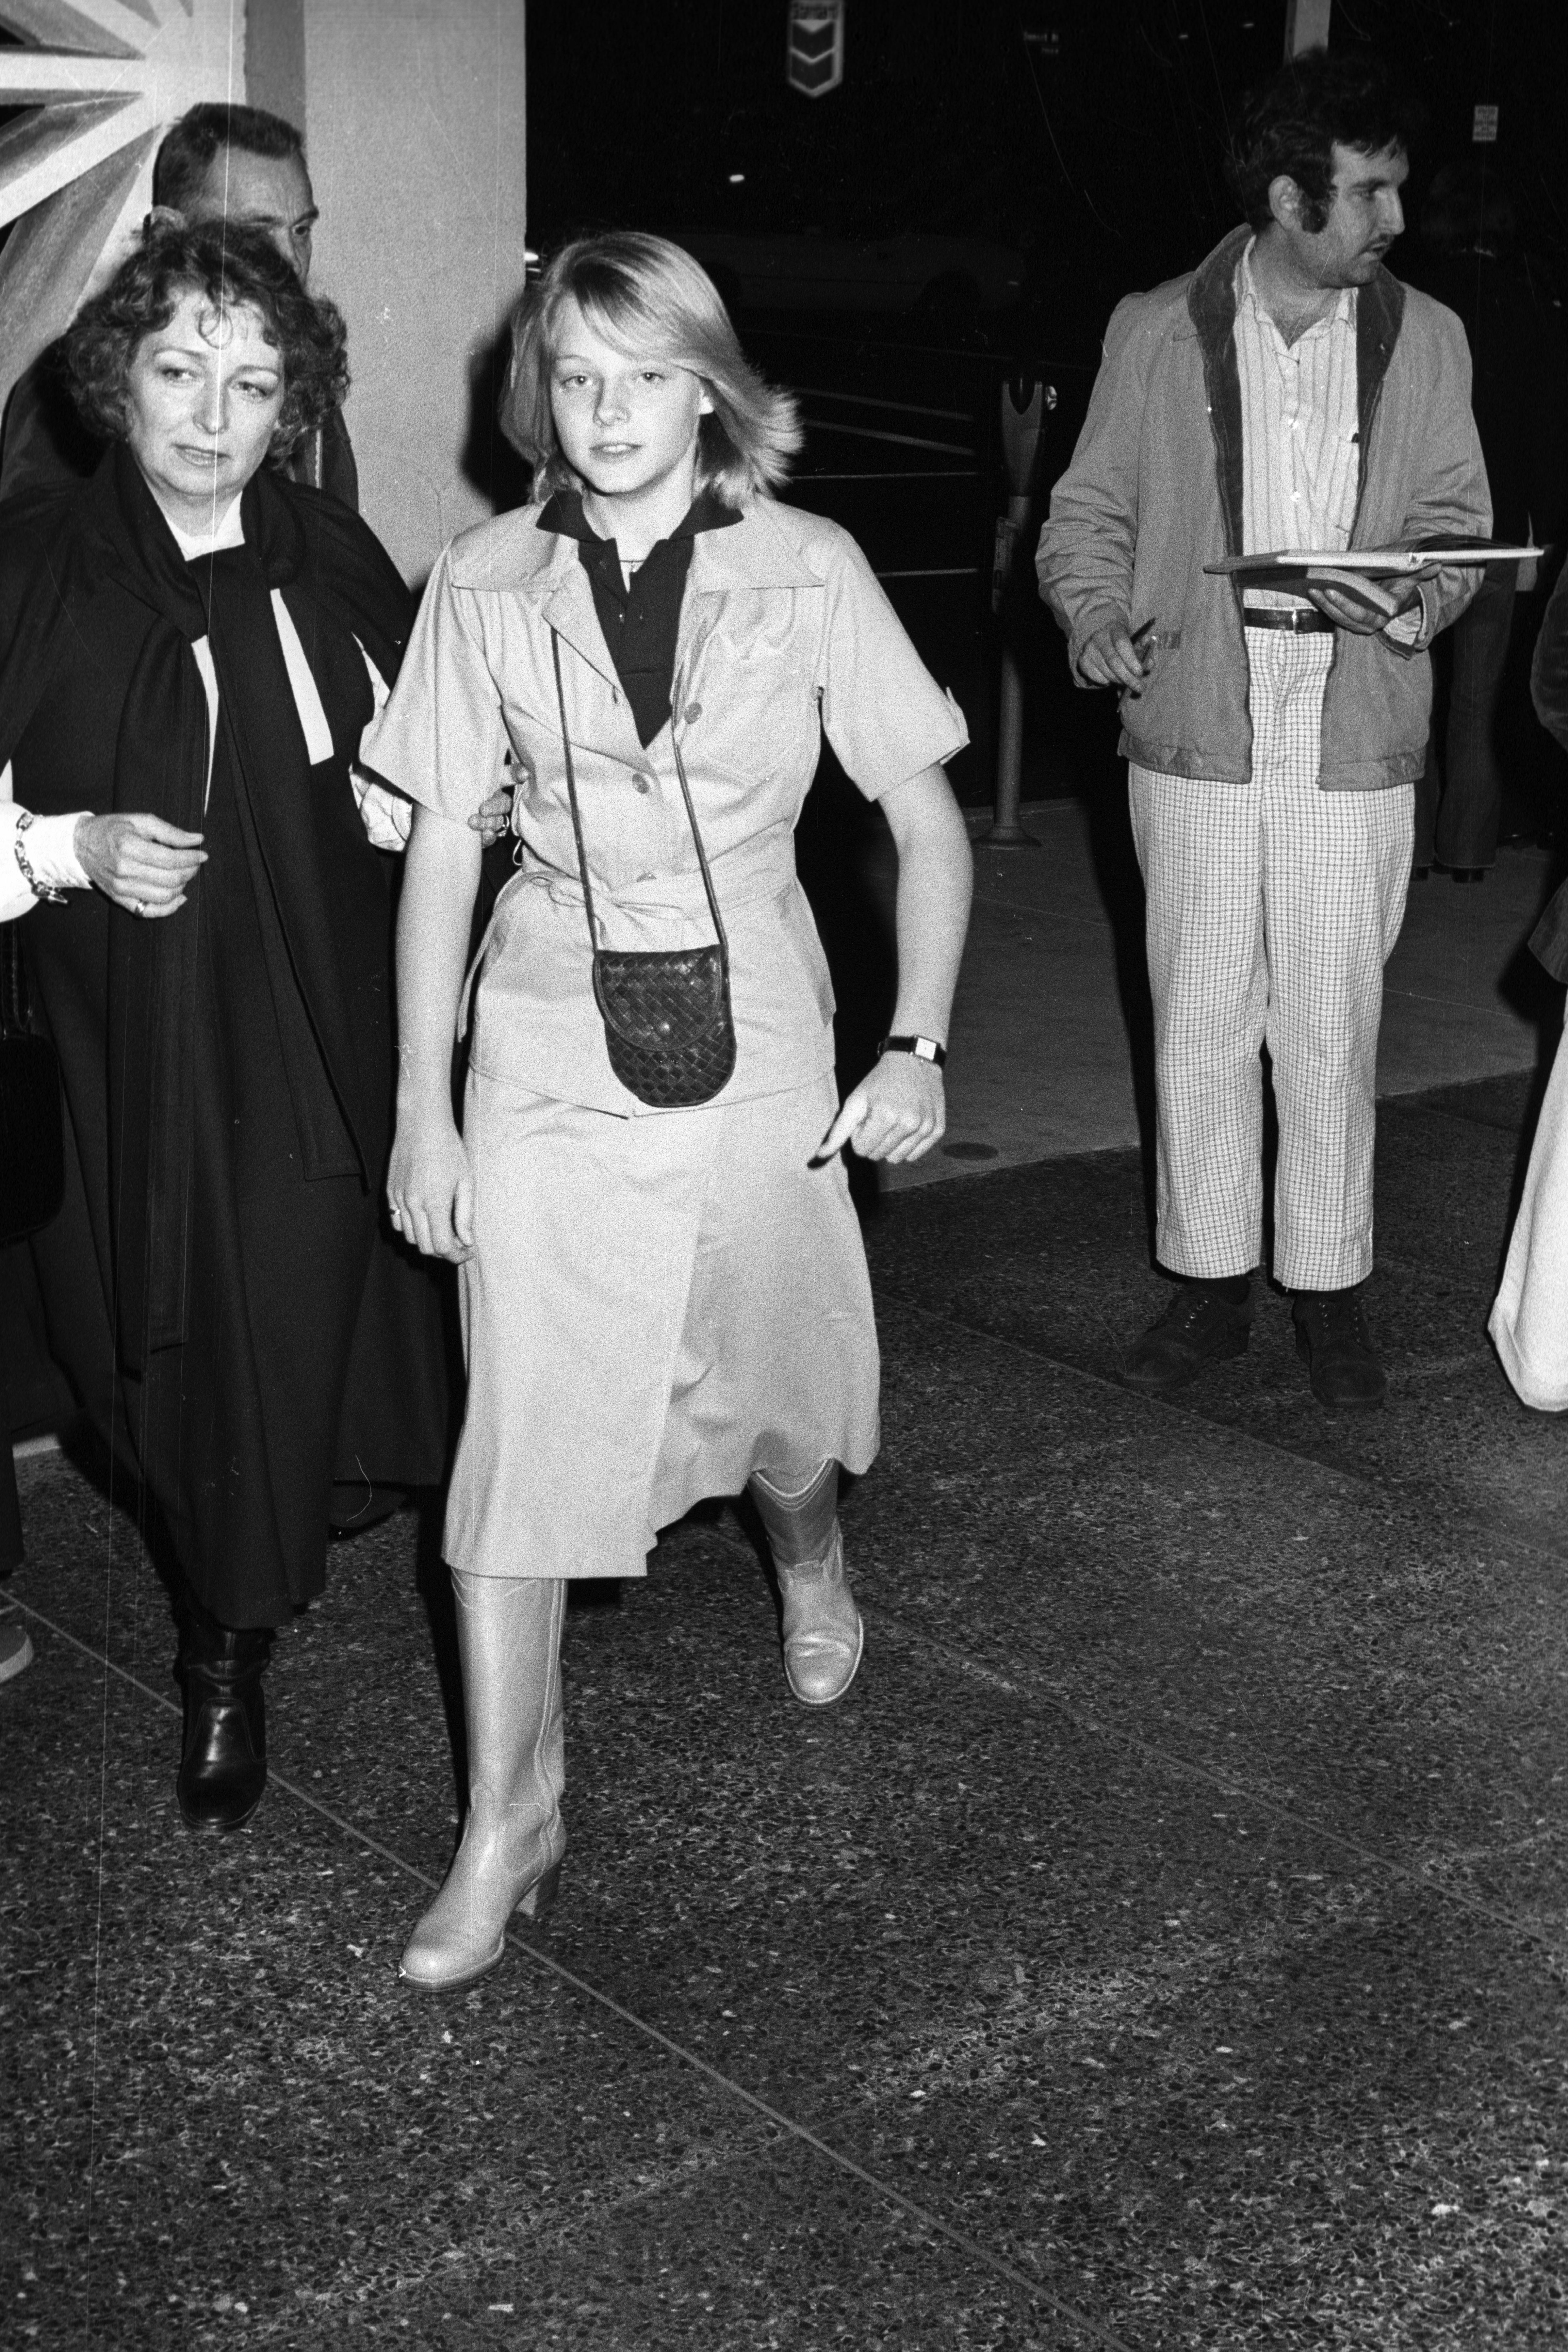 Evelyn 'Brandy' Foster, Jodie Foster, and a crew member at a preview of "Taxi Driver" at the Director's Guild in Hollywood in the 1970s | Source: Getty Images